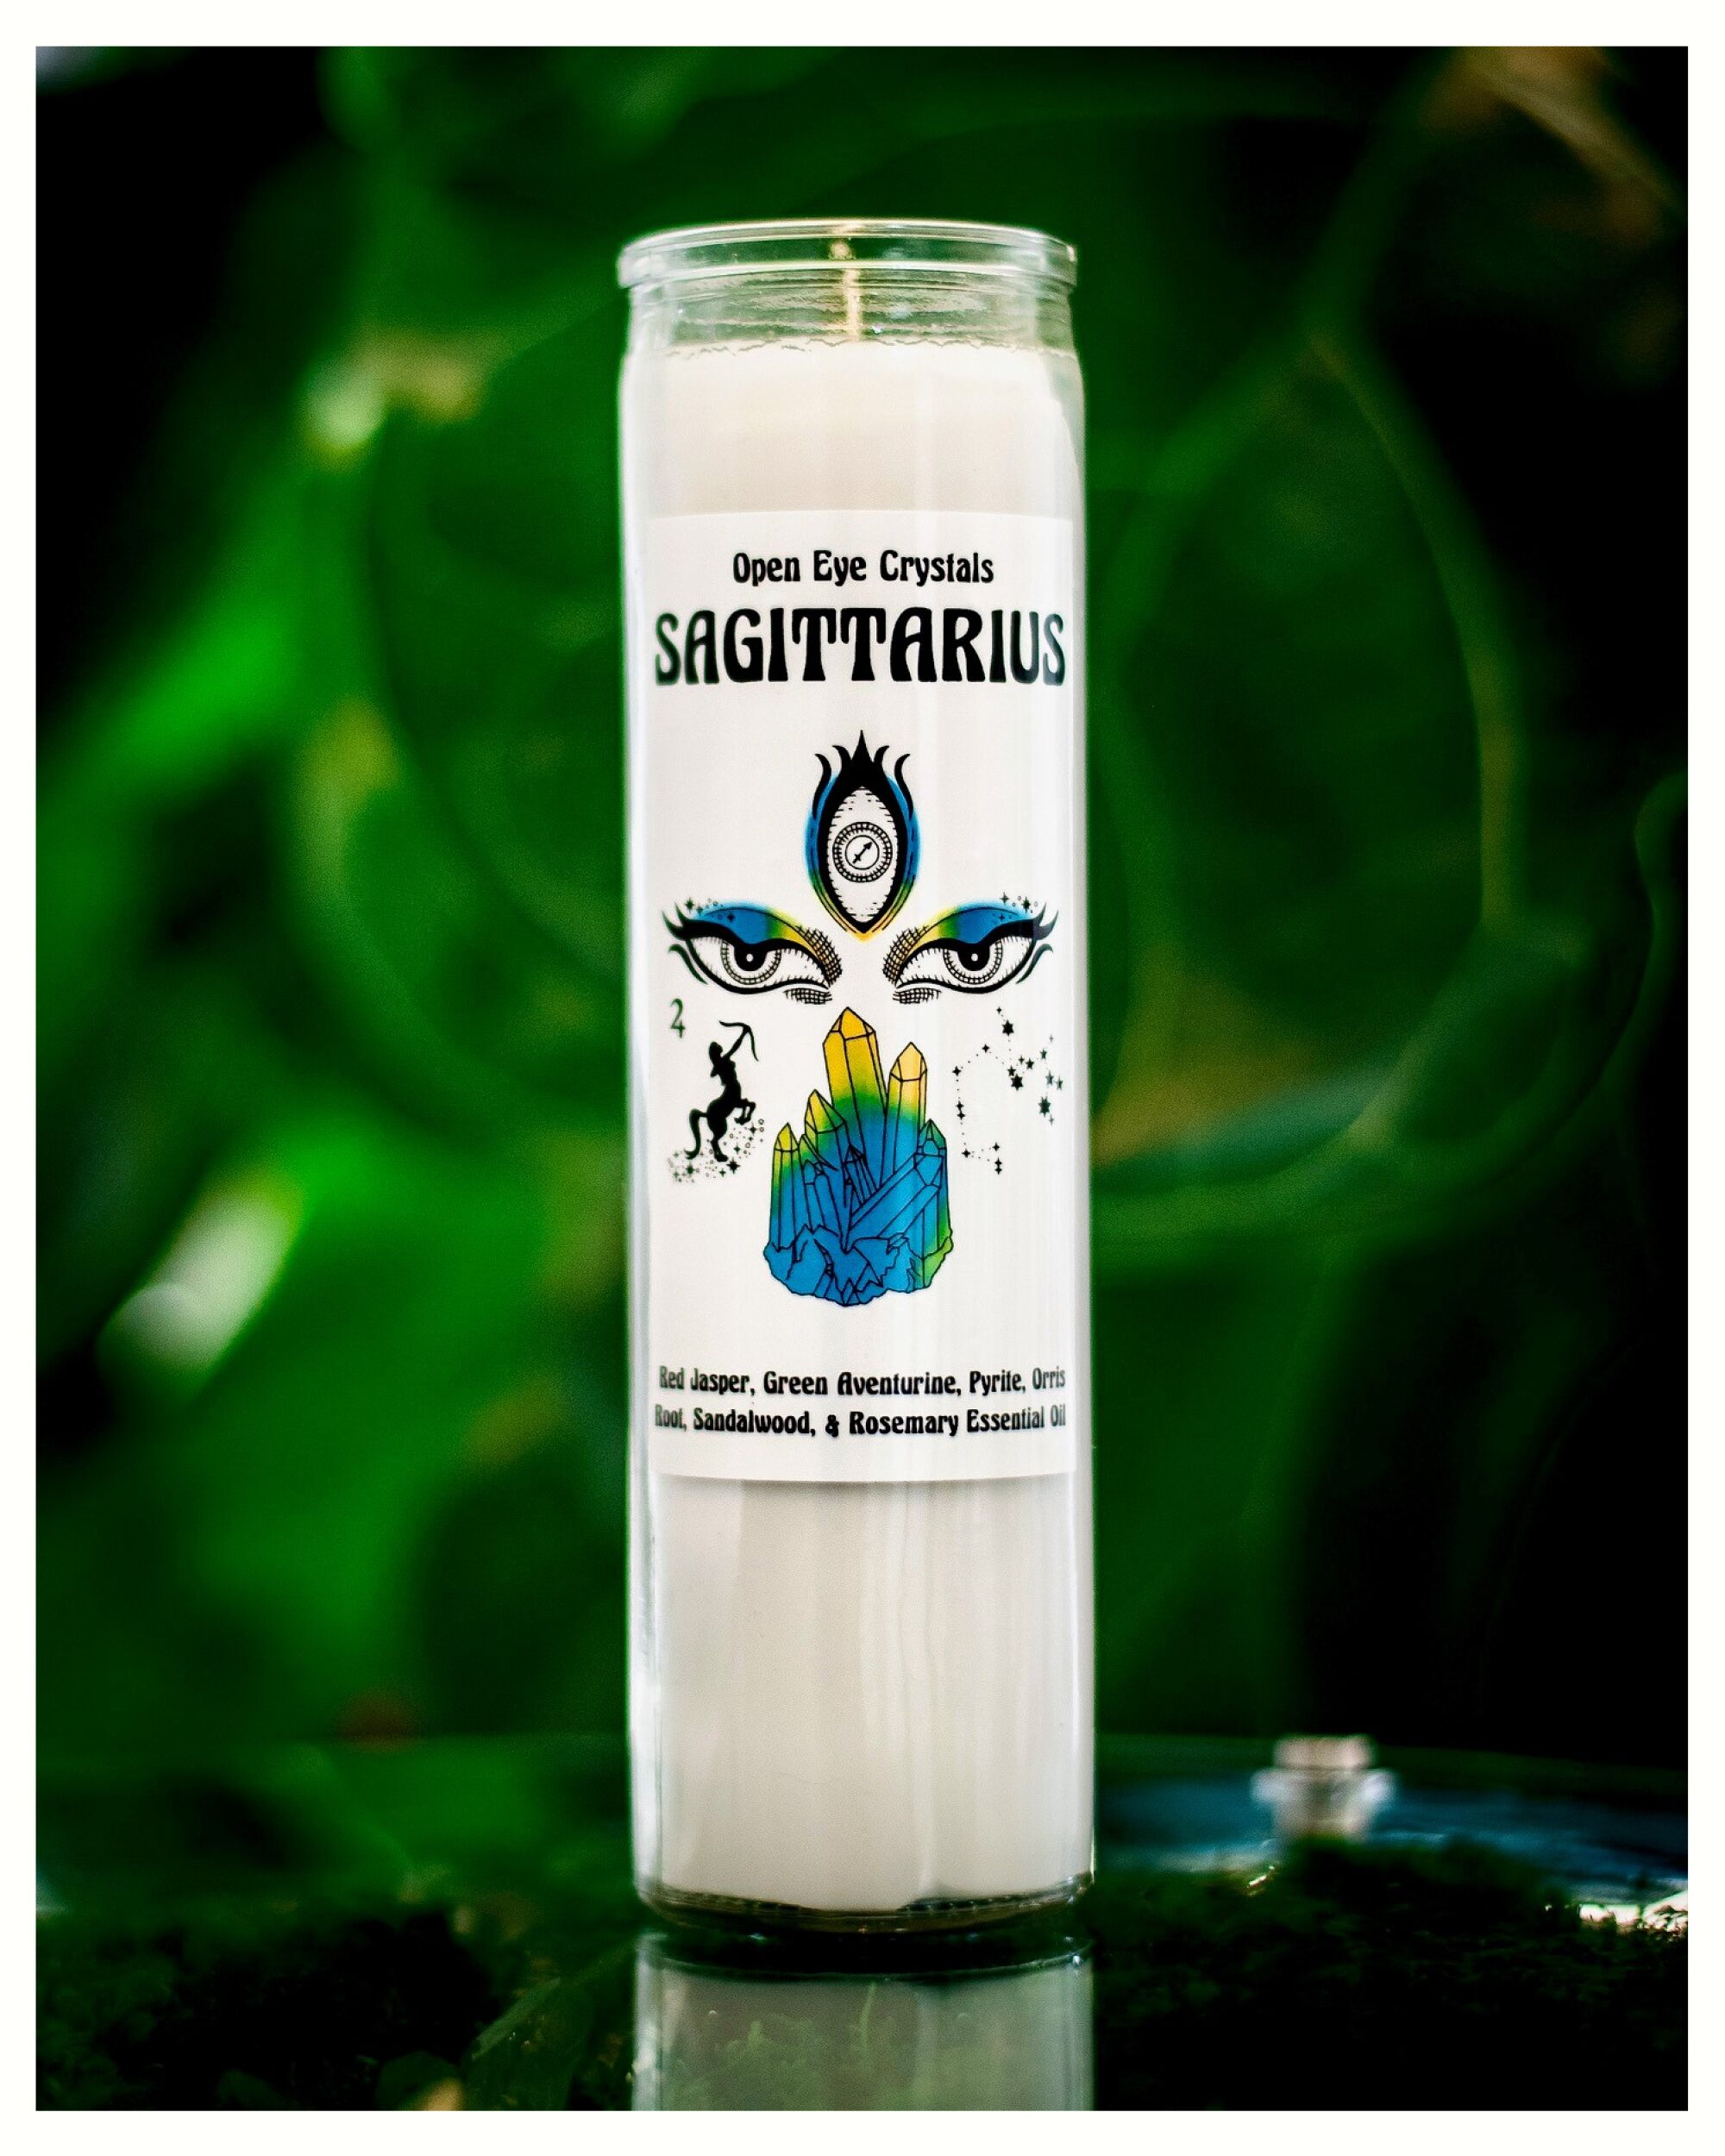 A Sagittarius candle from Open Eye Crystals